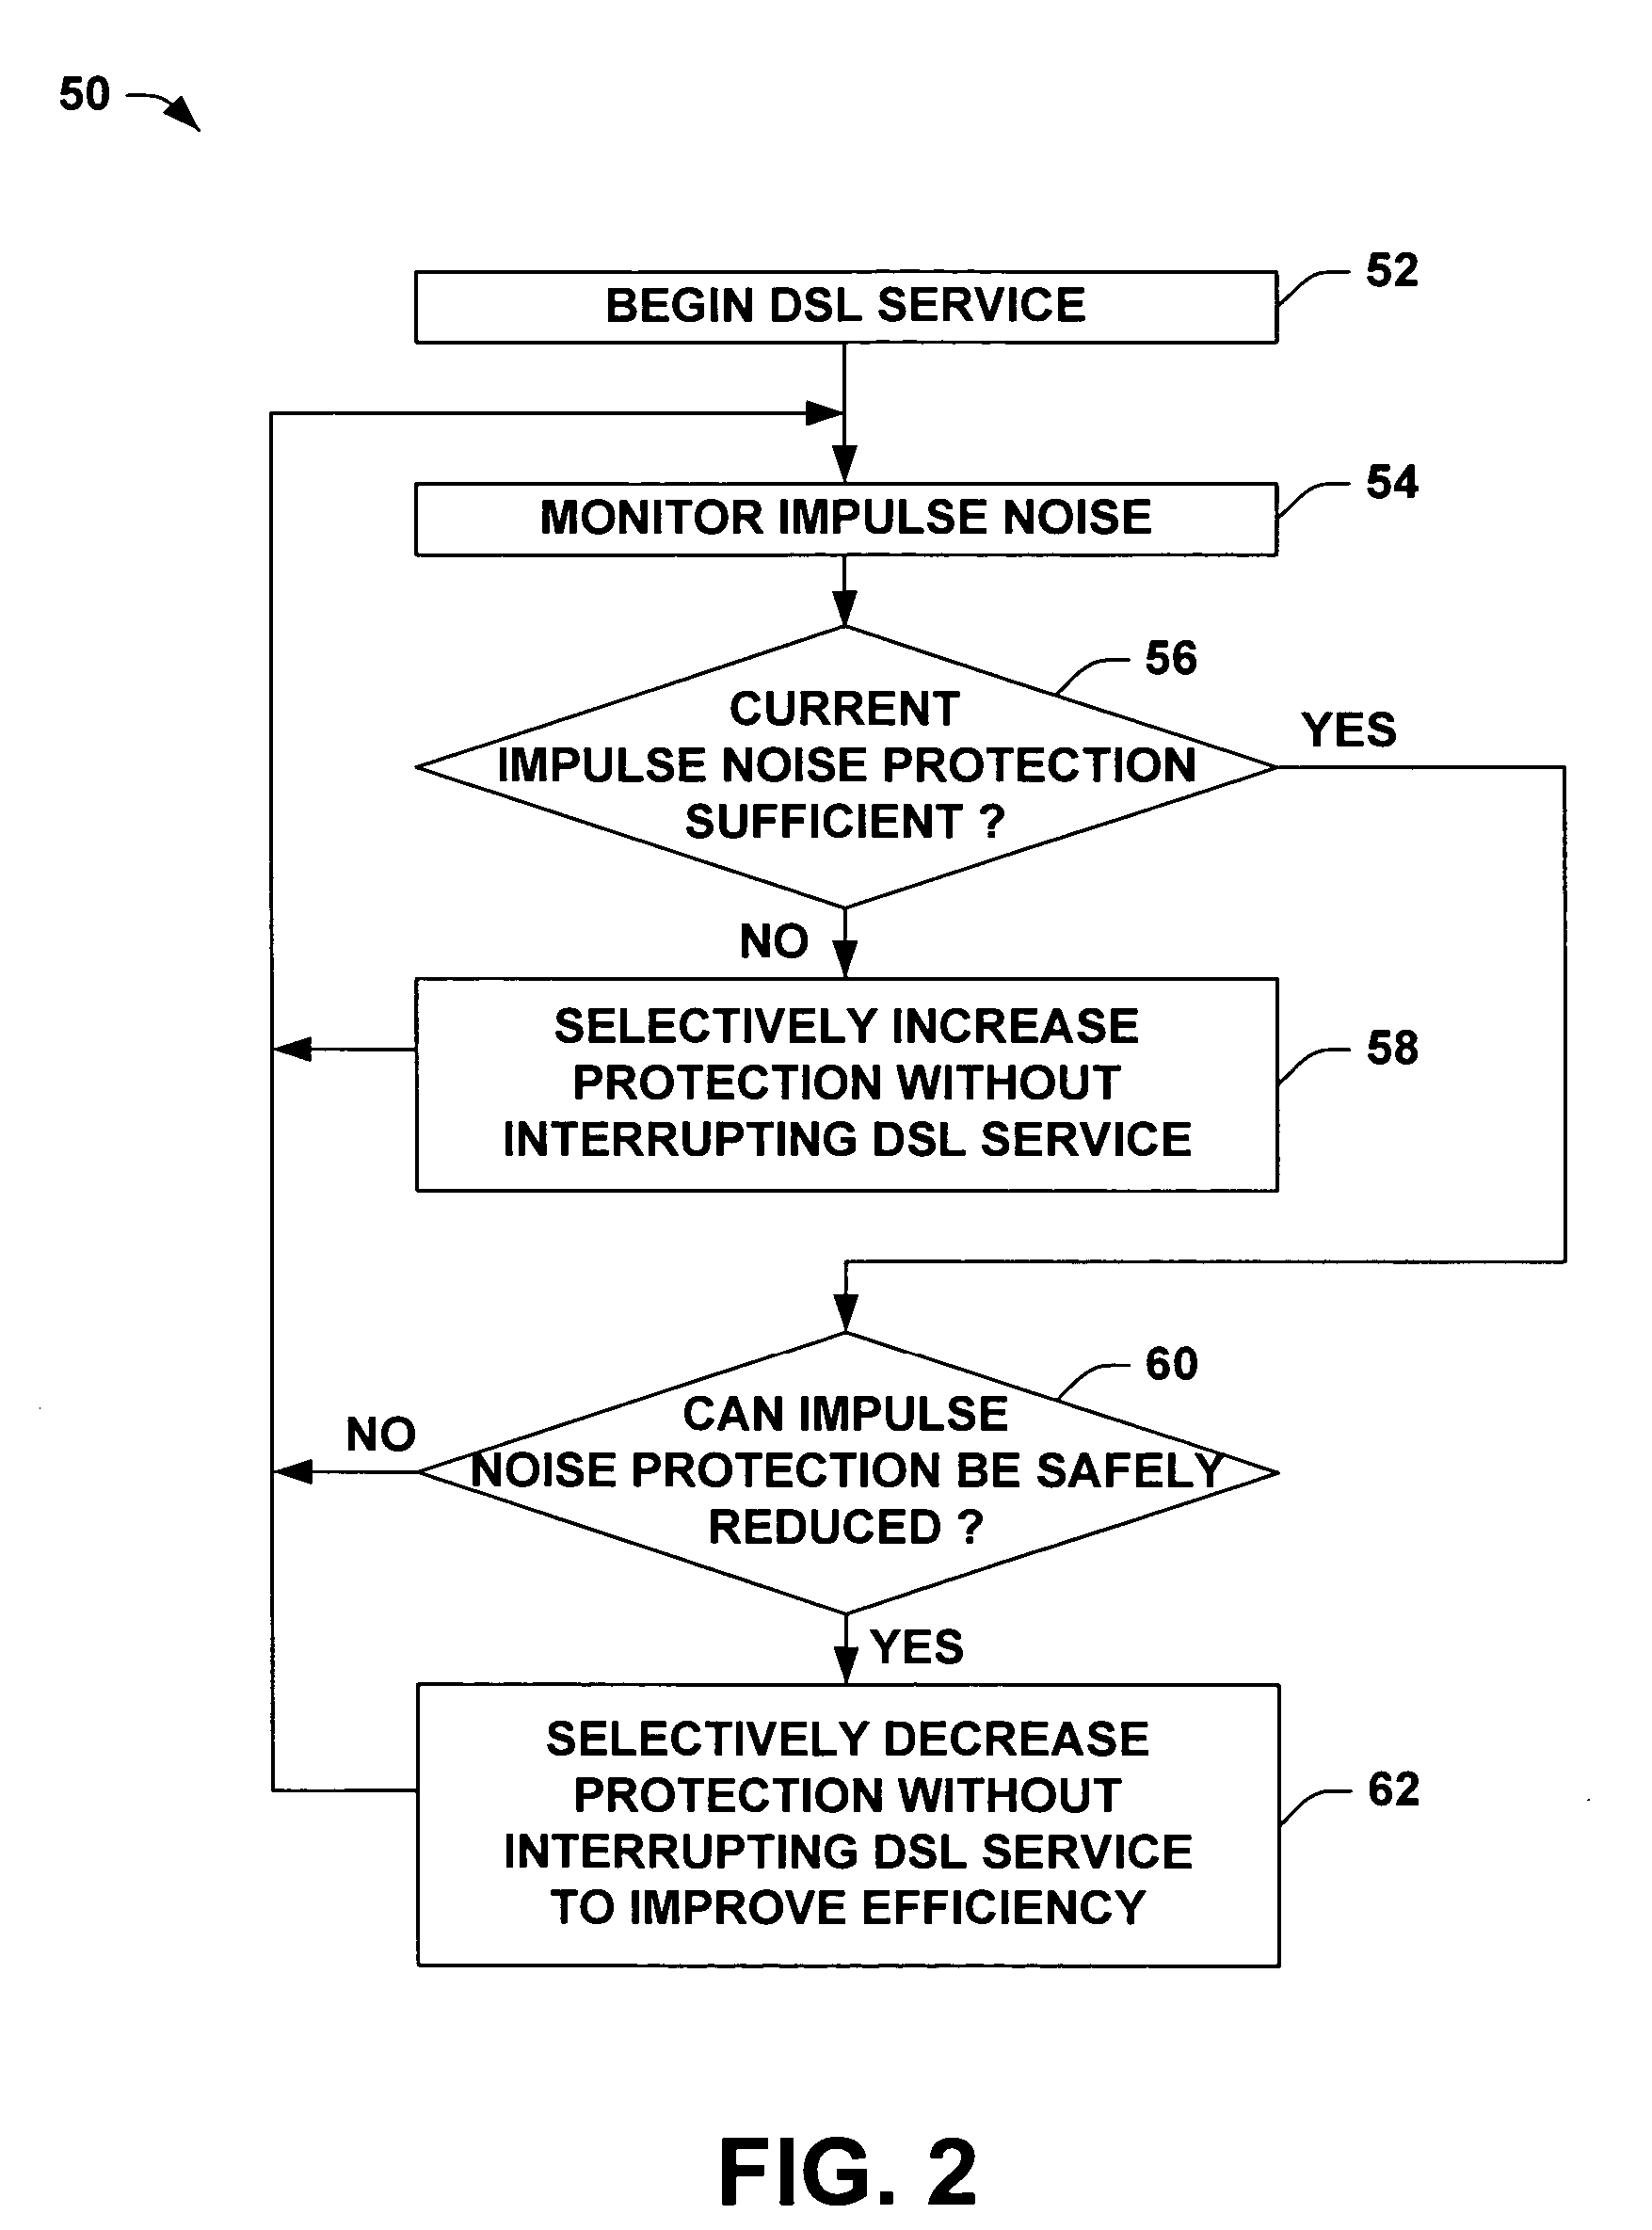 Adaptive communication systems and methods